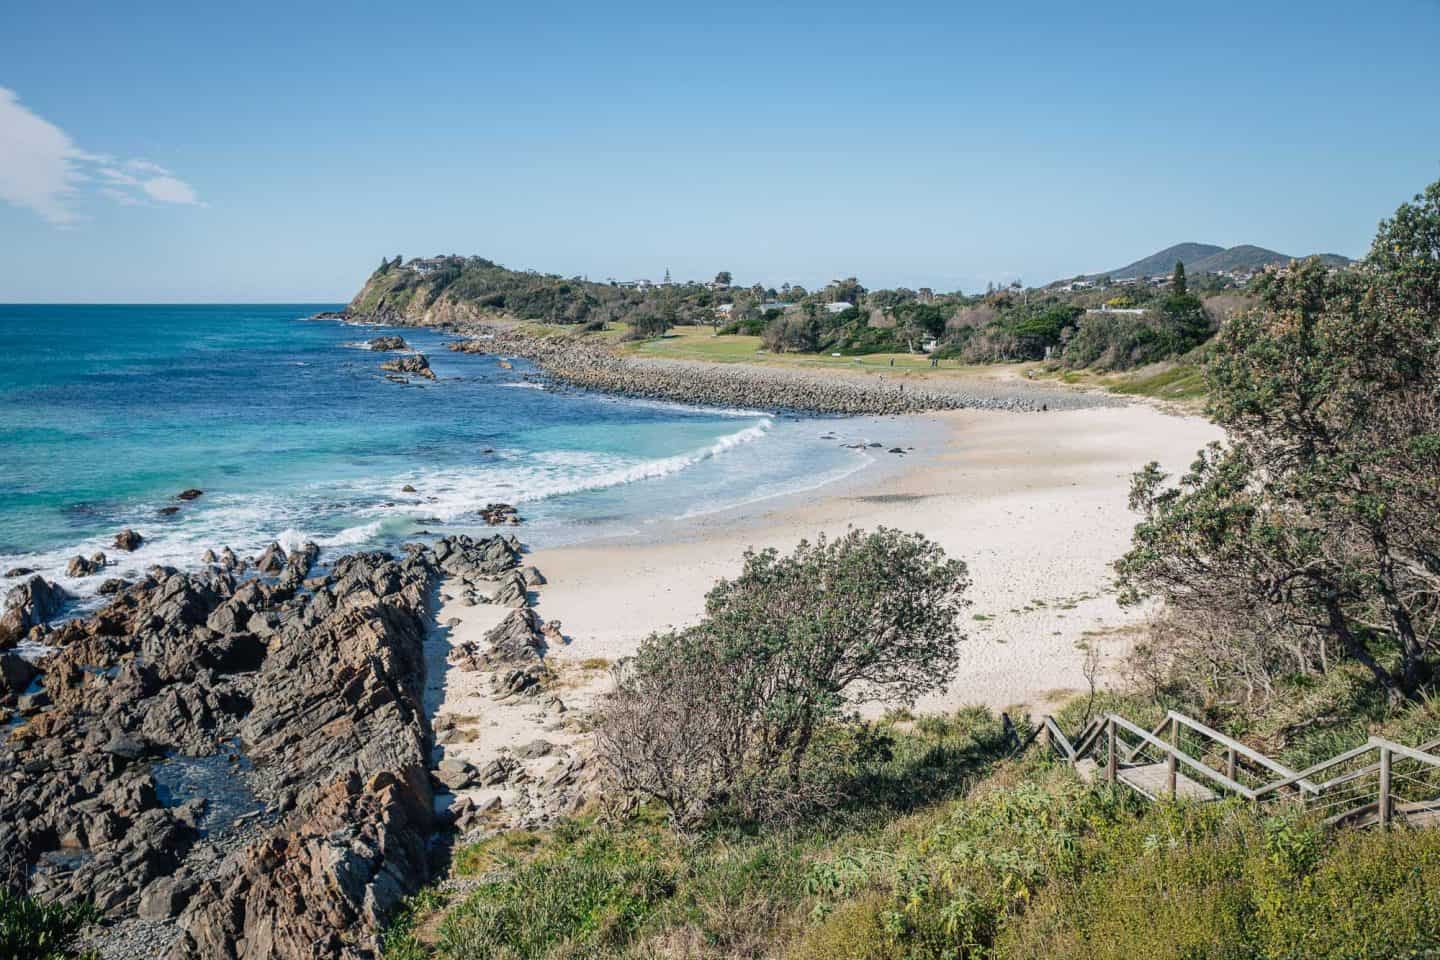 Forster nsw, things to do in forster, what to do in forster, things to do forster, camping in forster, beaches in forster, beaches at forster, pebbly beach forster